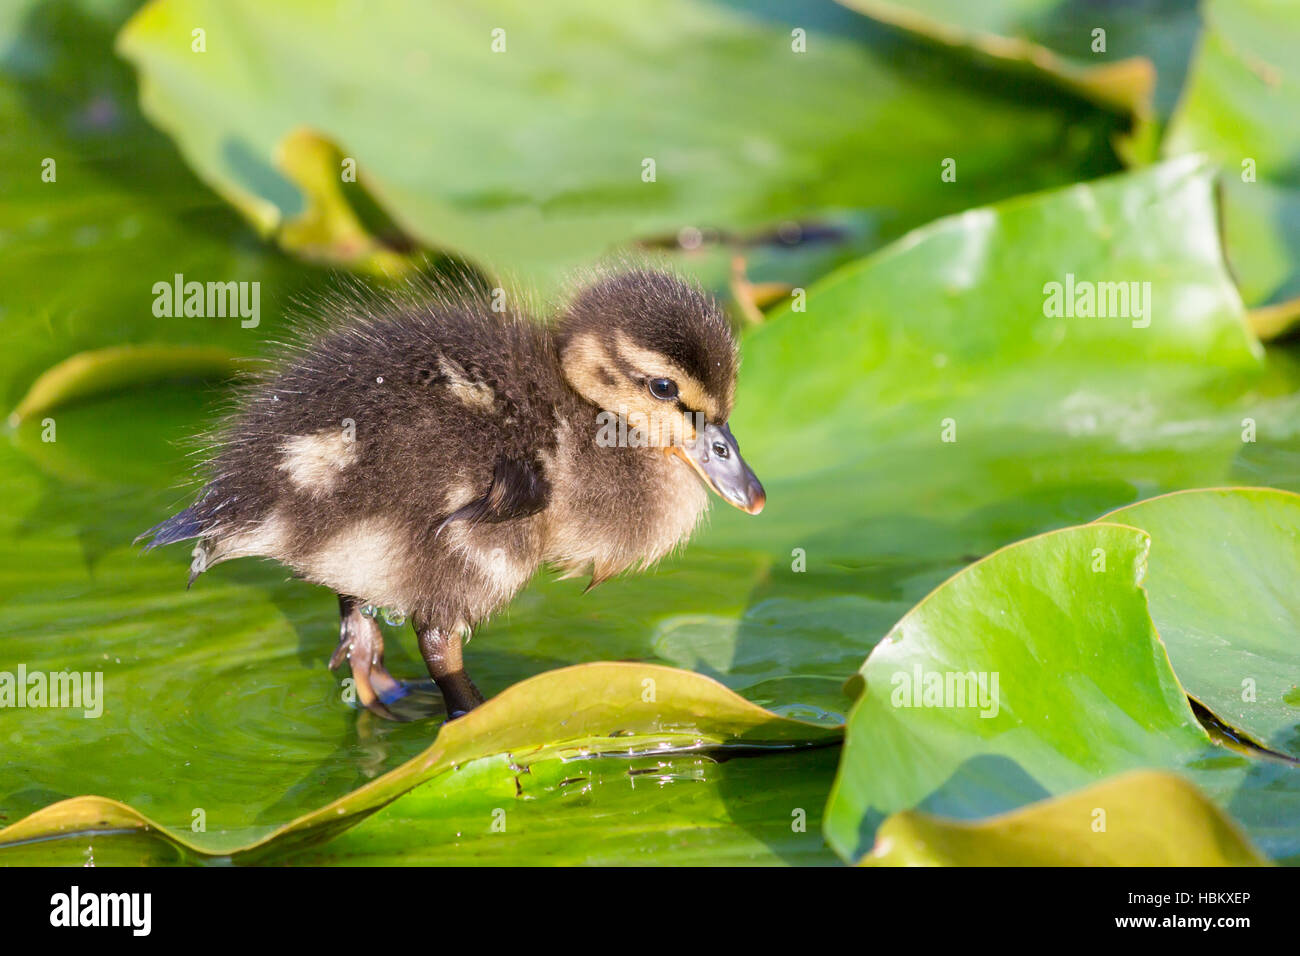 Brown duckling walking on water lily leaves Stock Photo